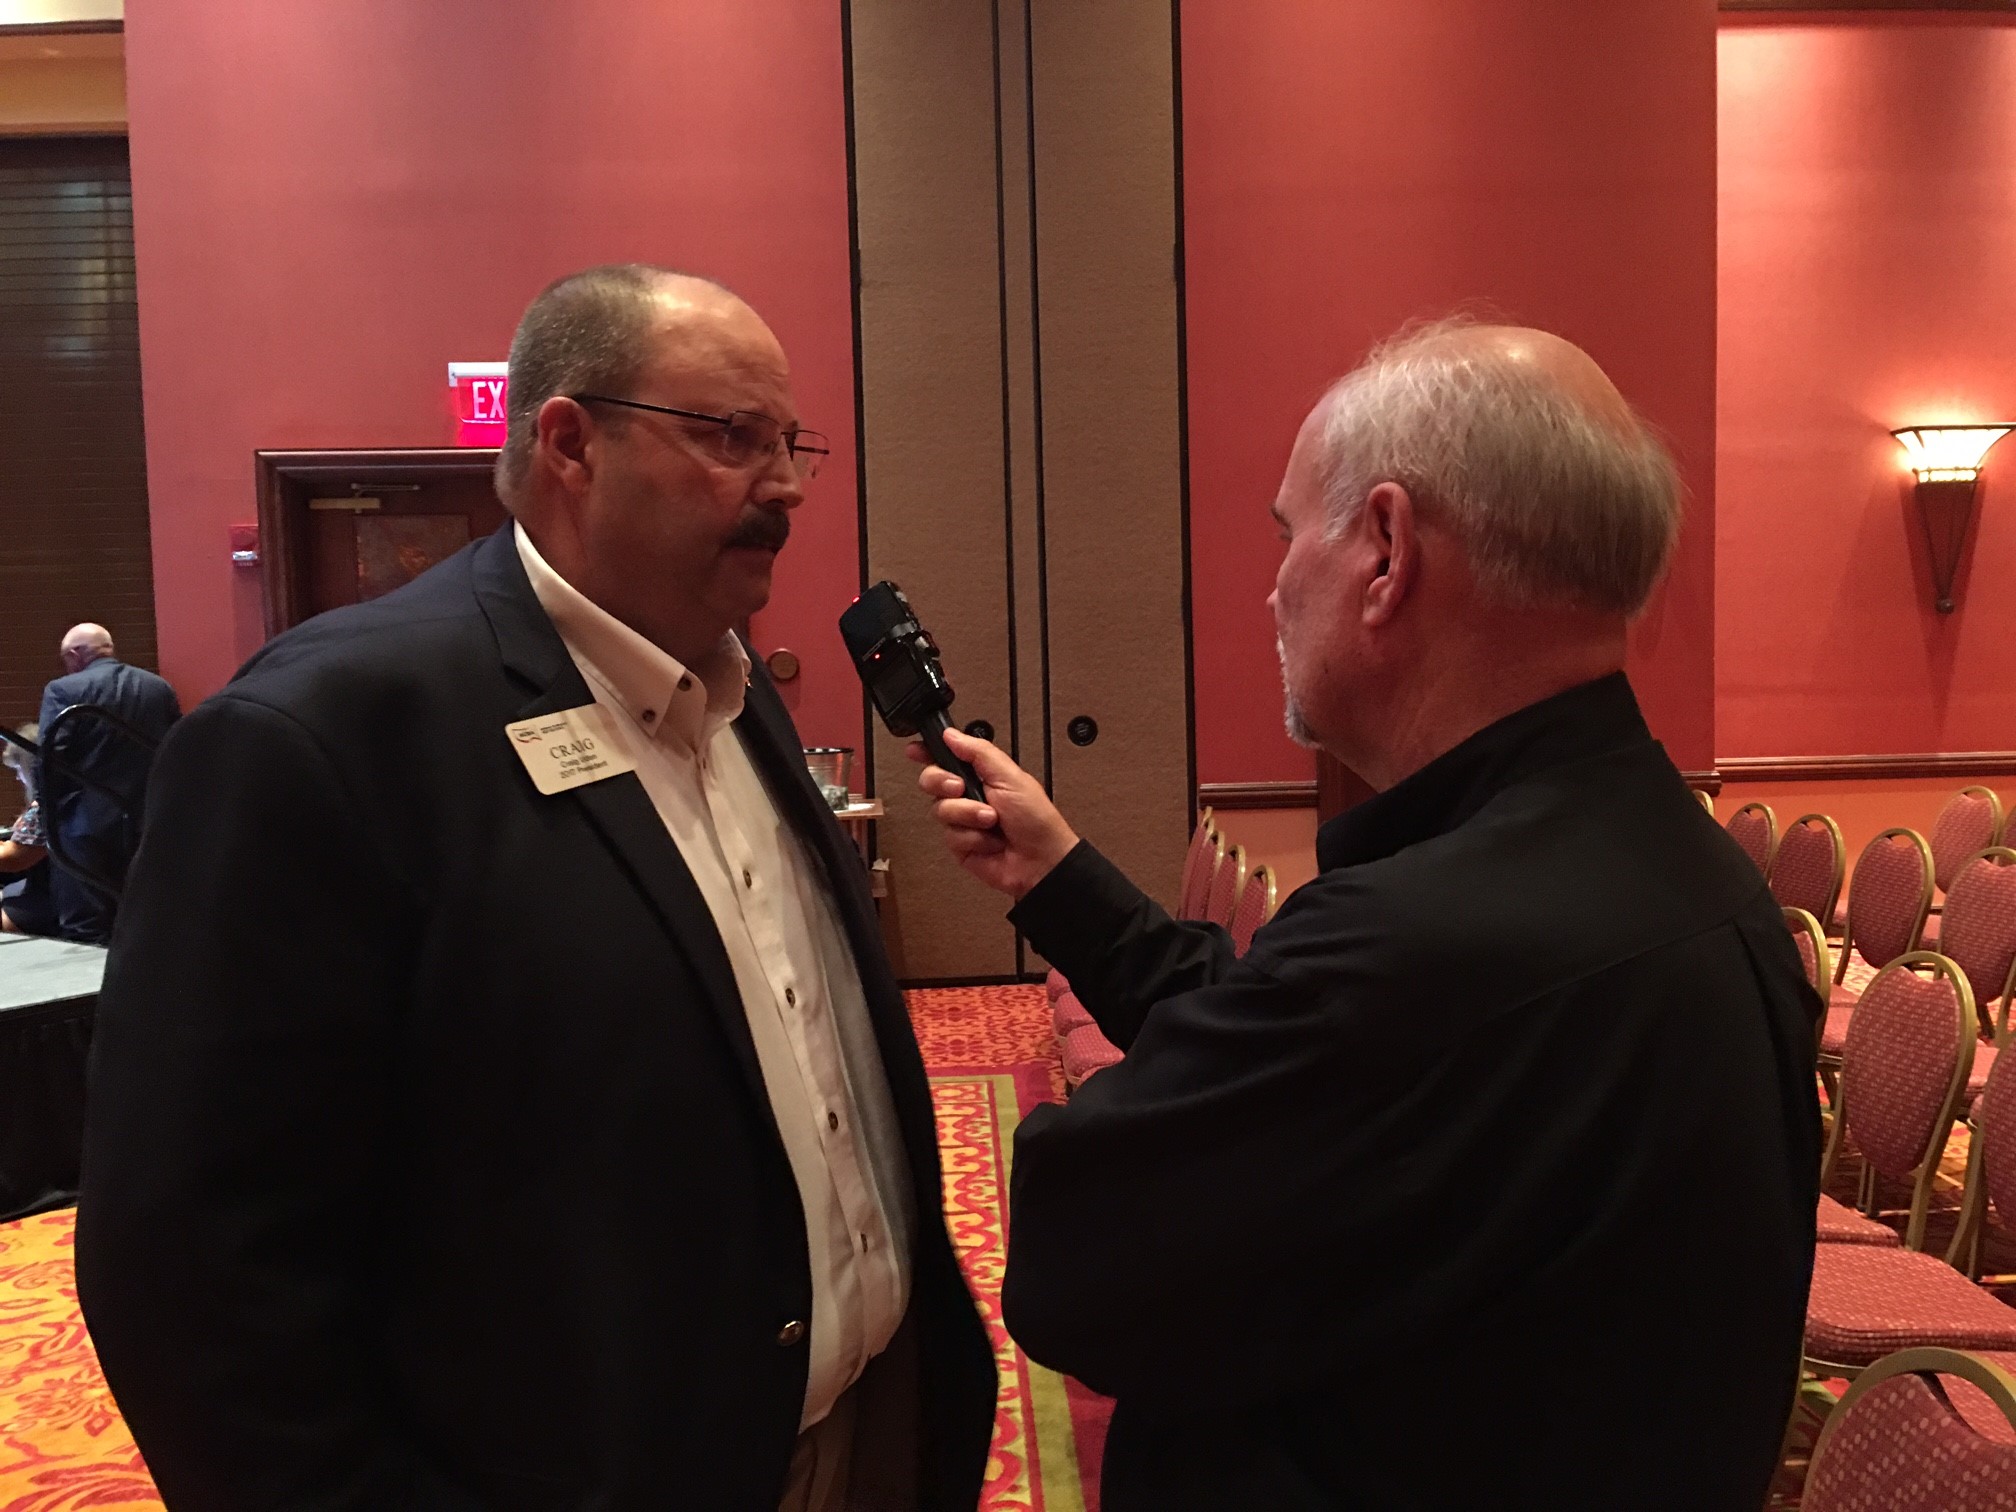 NCBA President Craig Uden Advises Cattle Industry to 'Keep Its Foot on the Gas' Finishing Out 2017